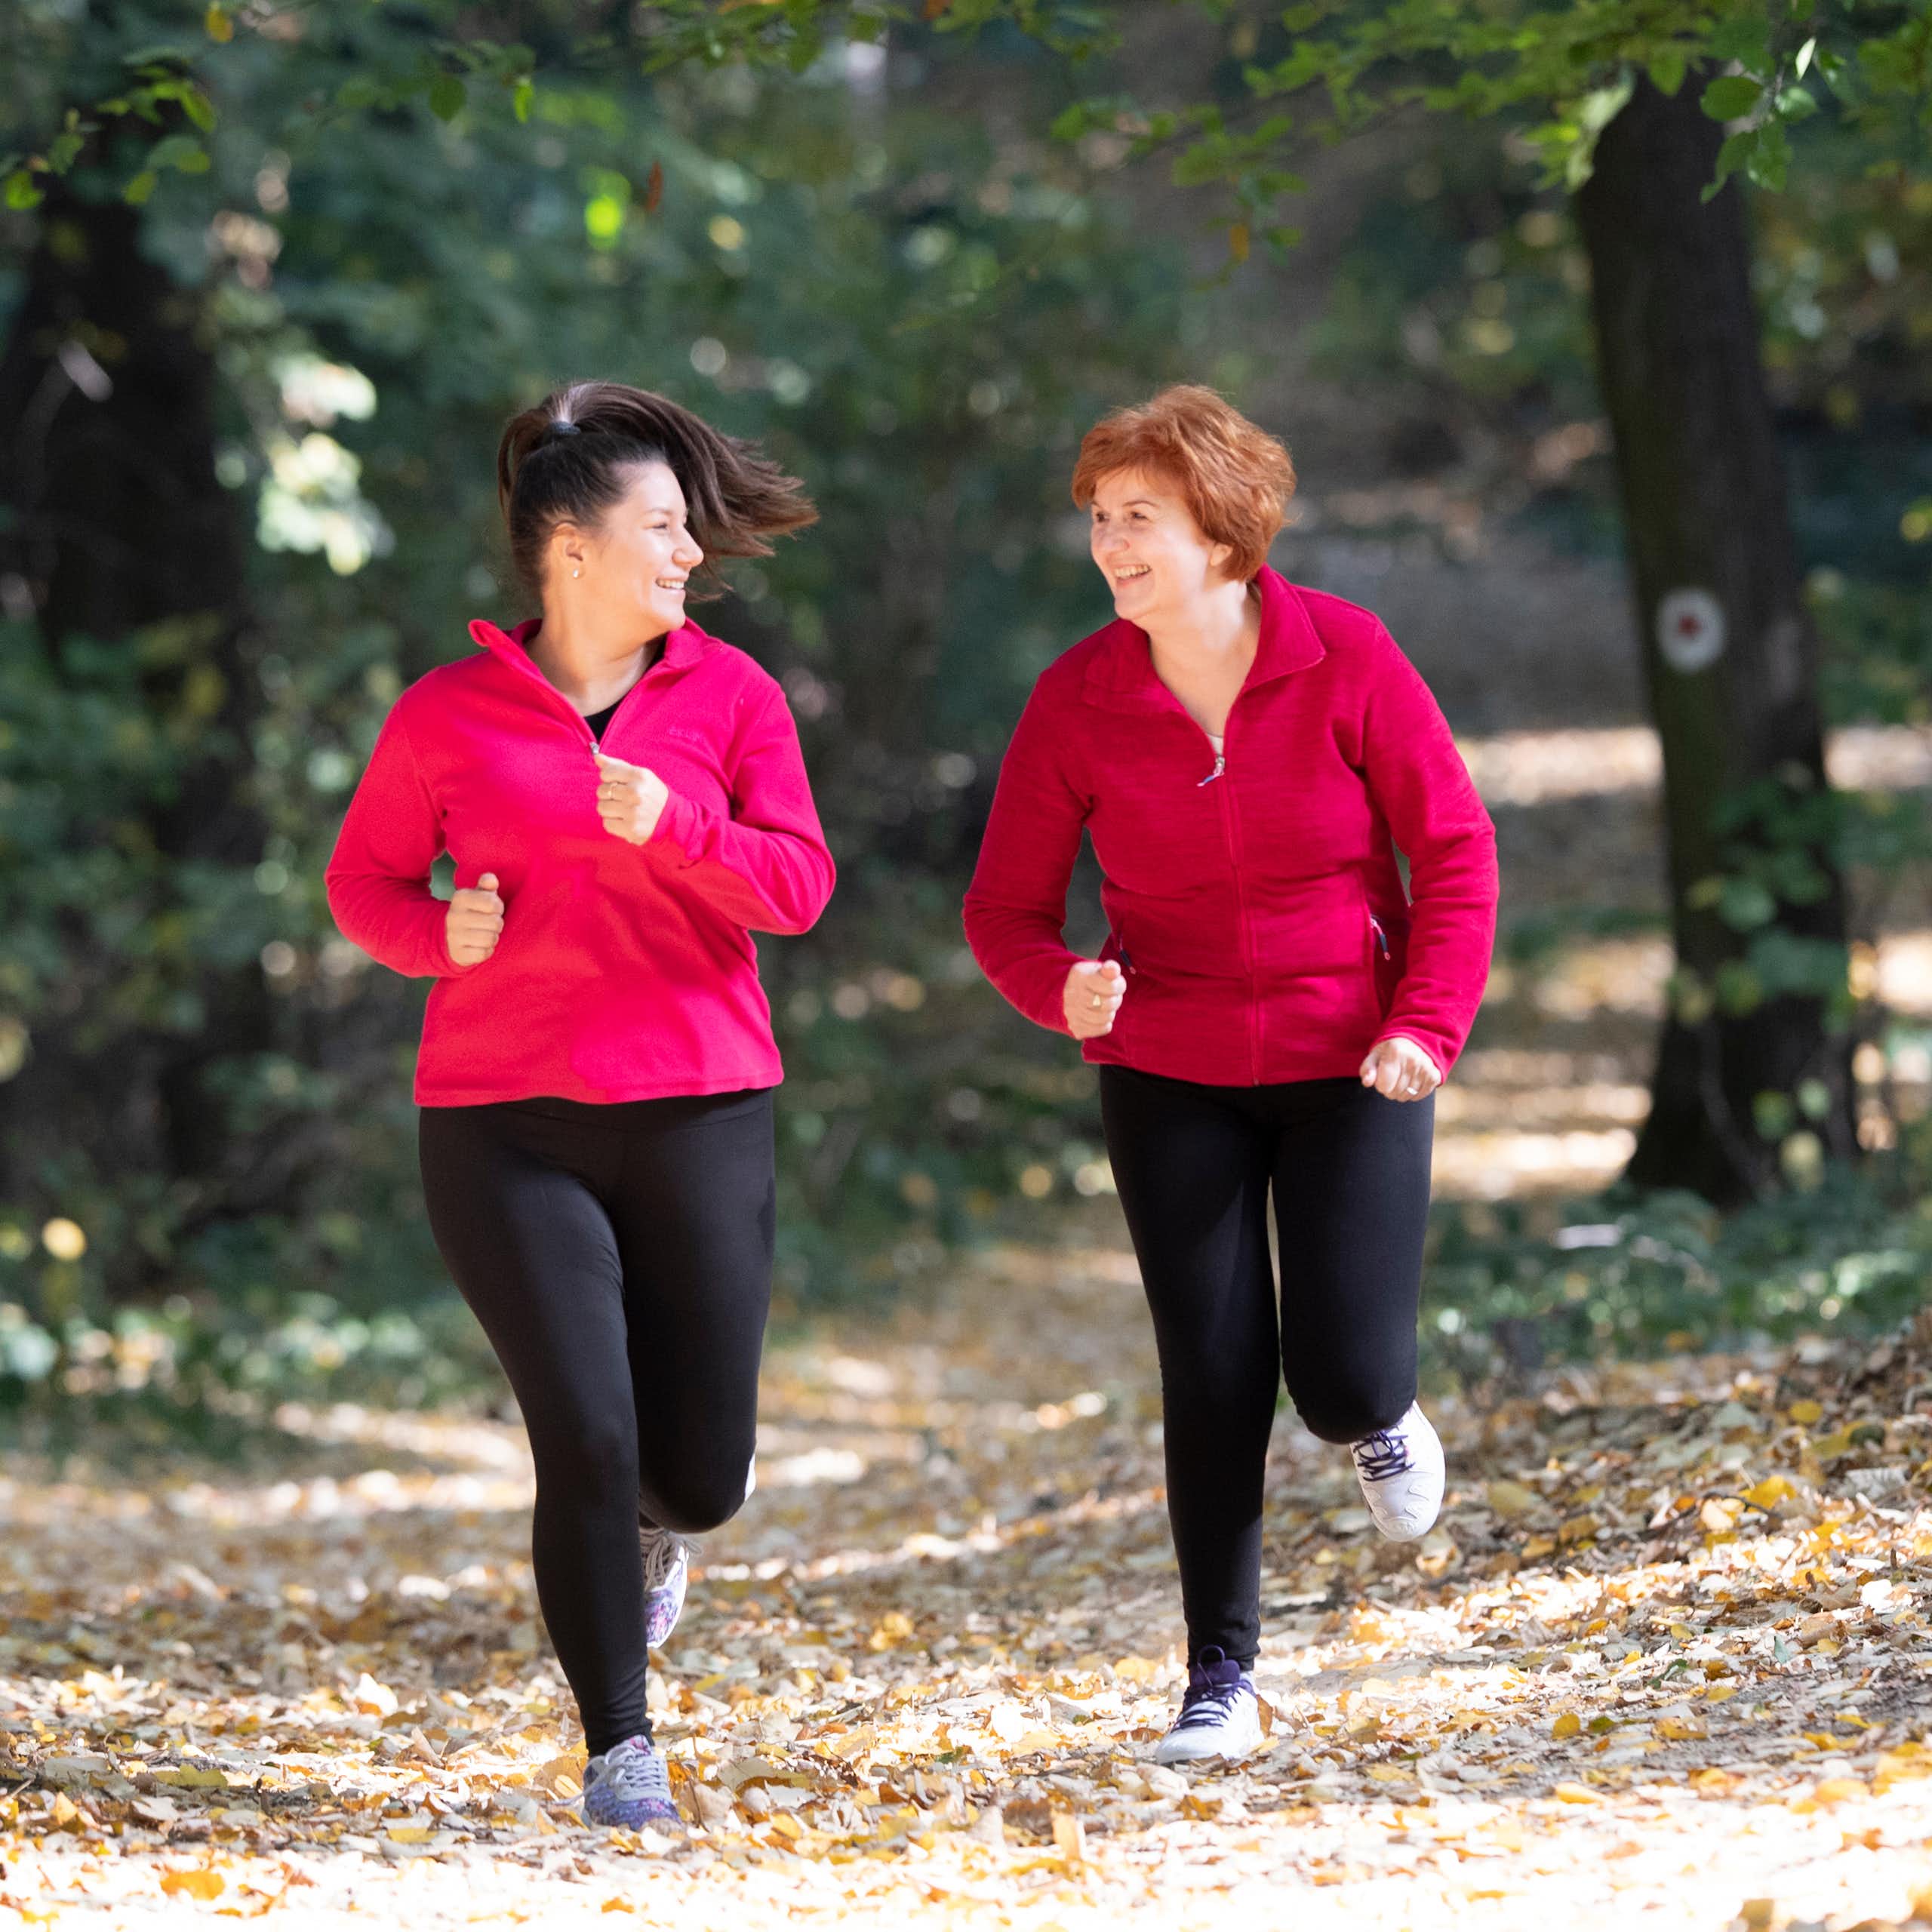 Two middle-aged women run in a forest.